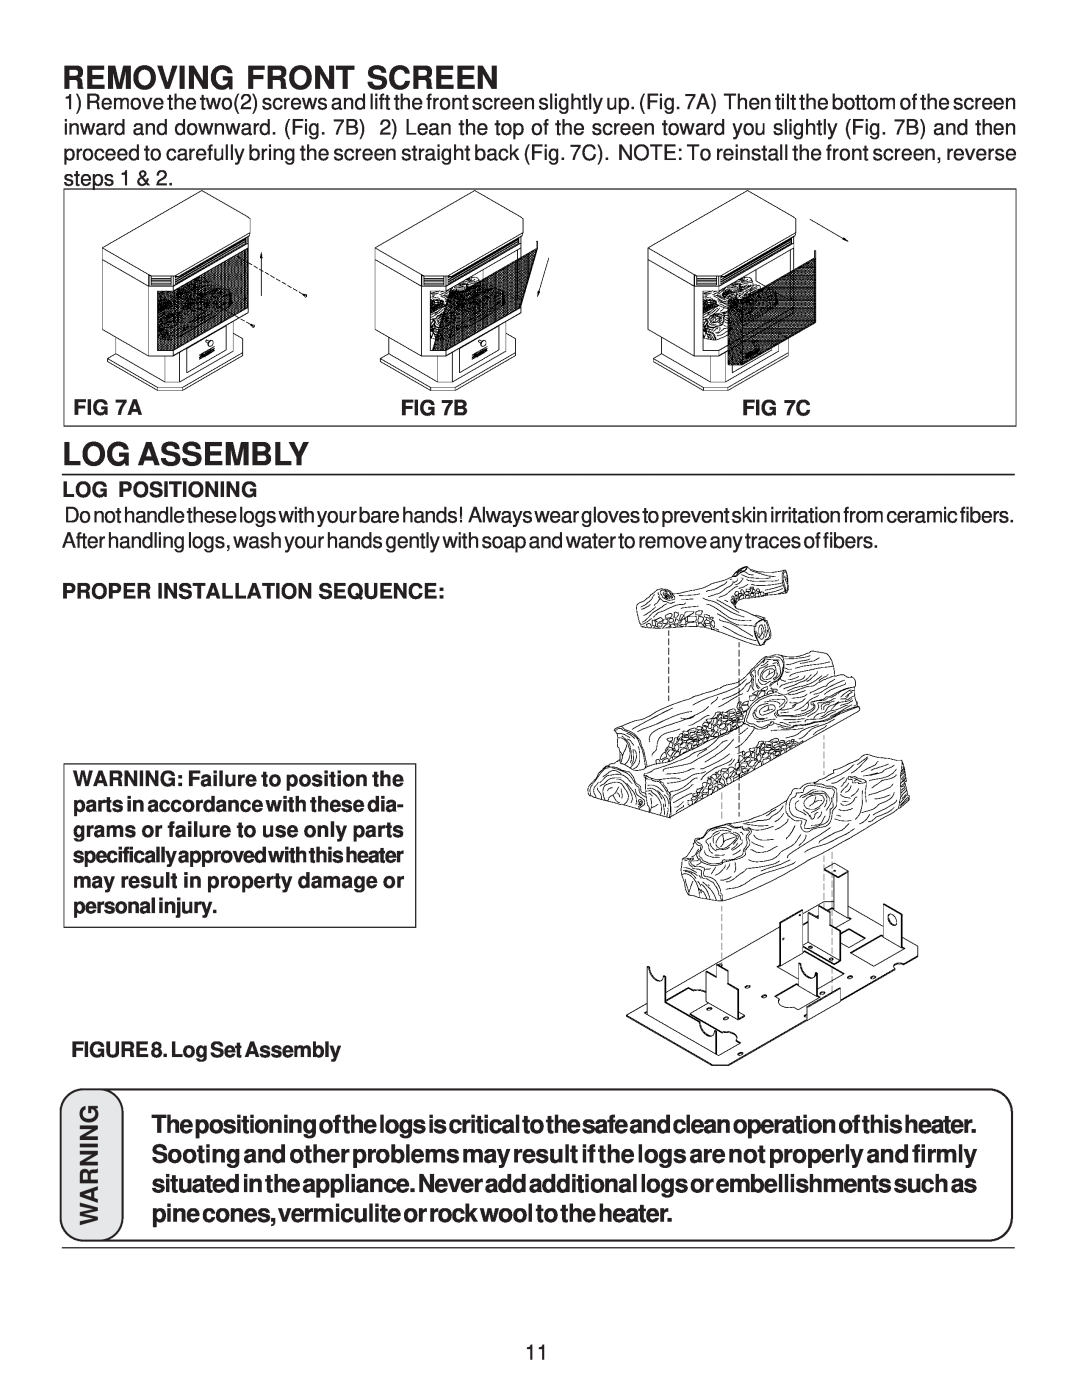 United States Stove B9945L manual Removing Front Screen, Log Assembly, C, Log Positioning, Proper Installation Sequence 